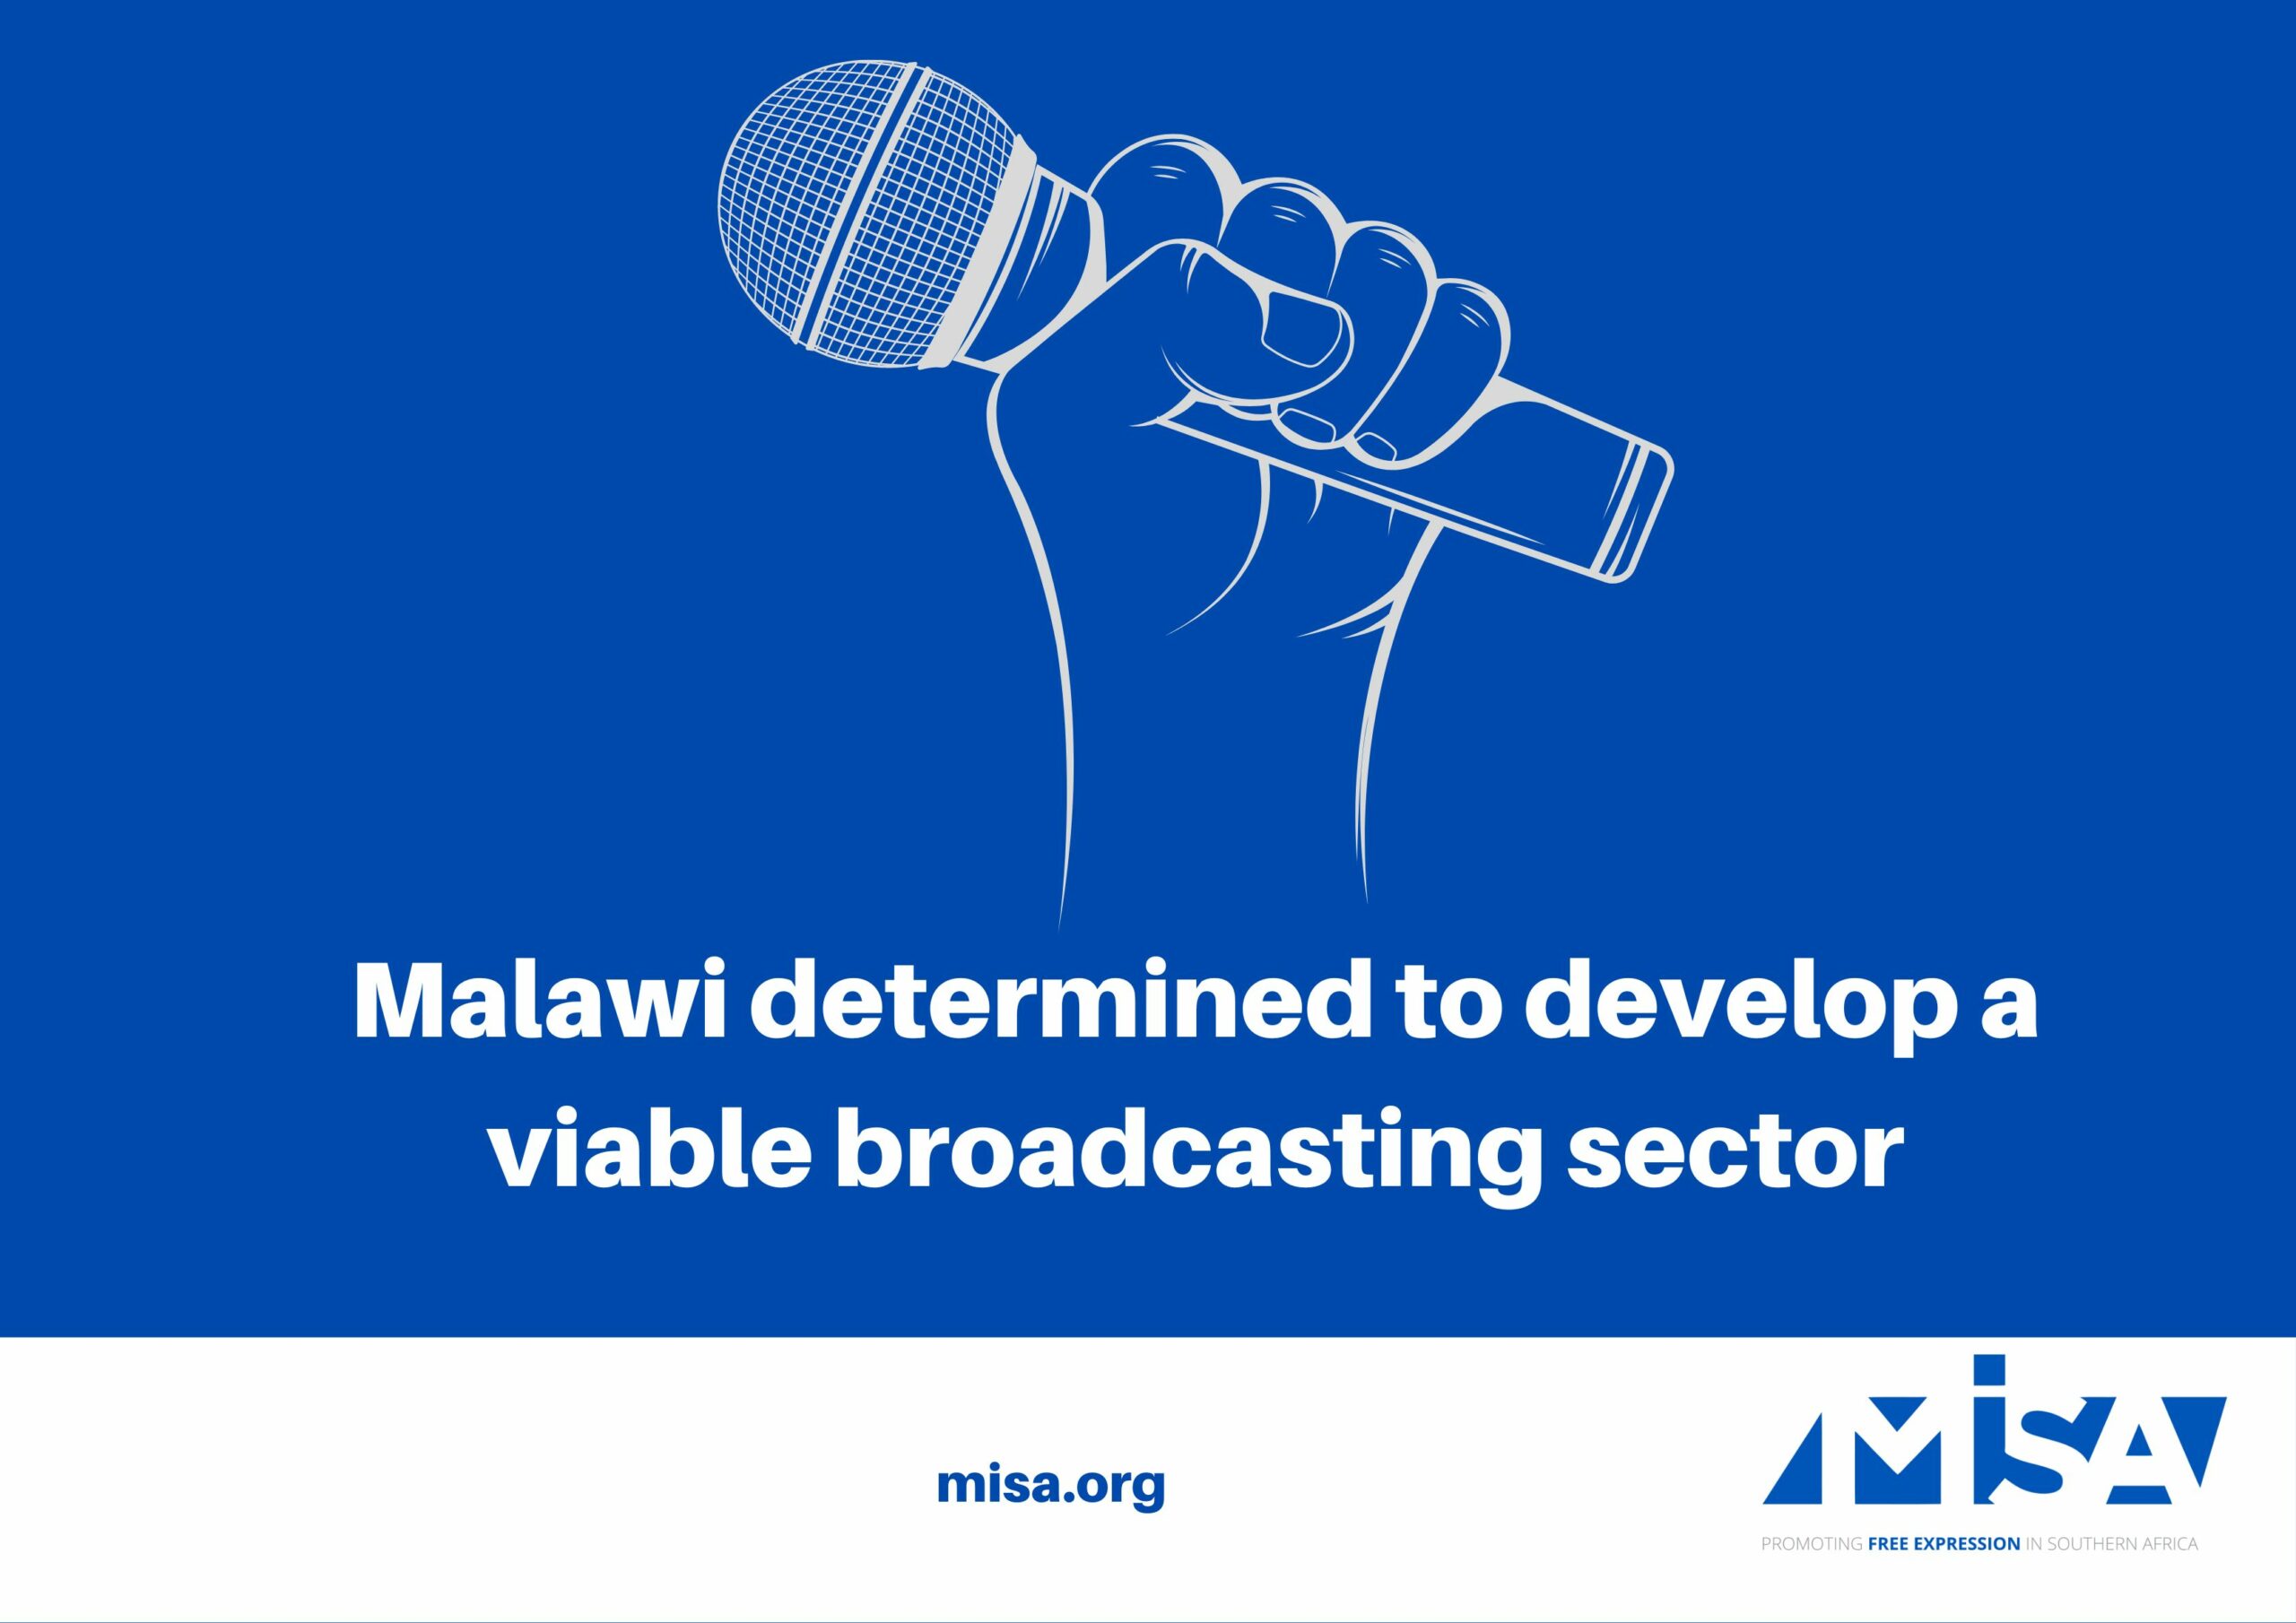 Malawi determined to develop a viable broadcasting sector